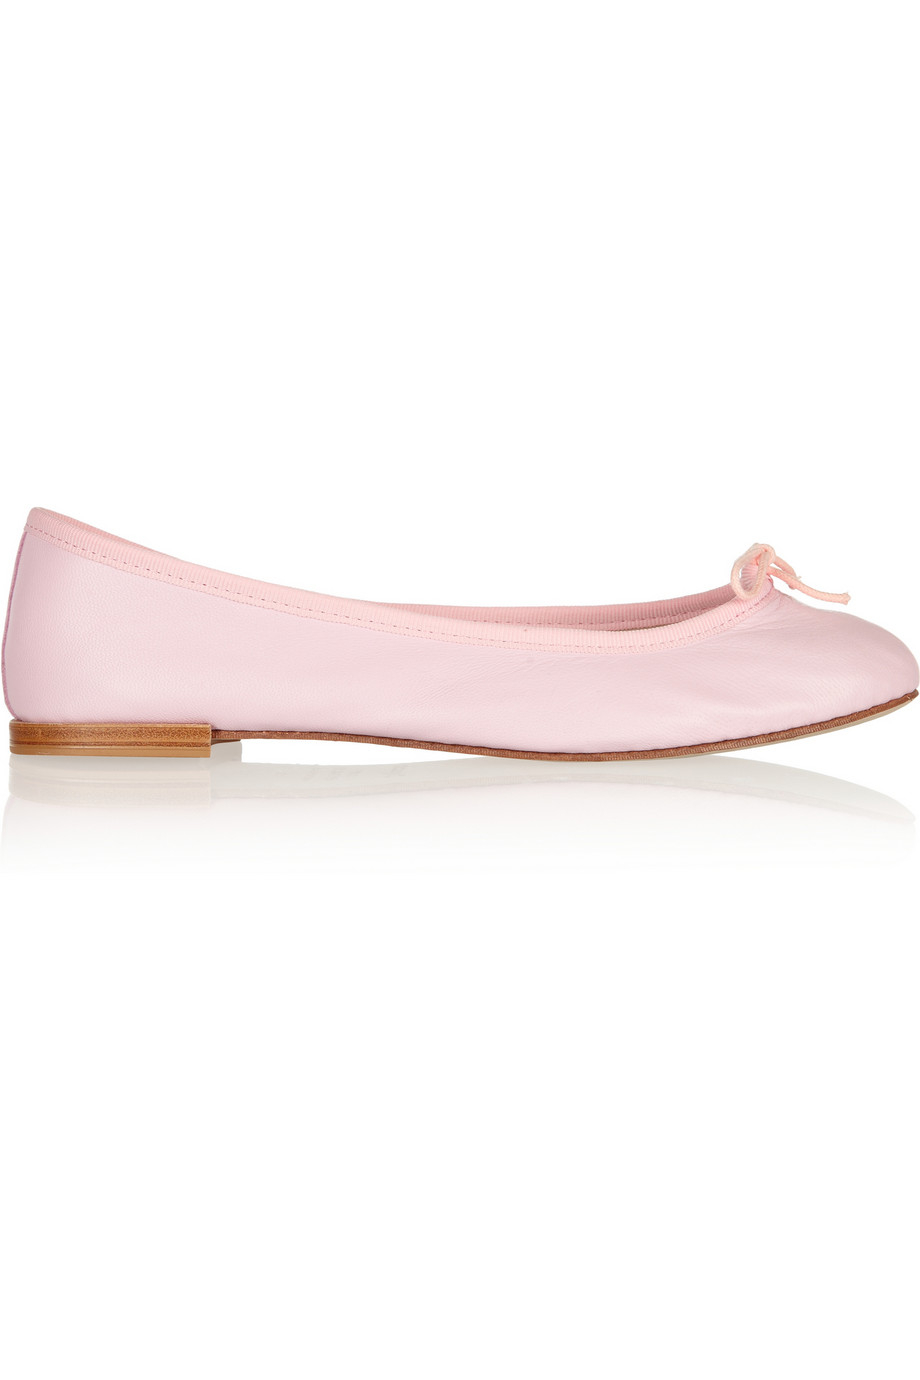 Lyst - Repetto The Cendrillon Leather Ballet Flats in Pink